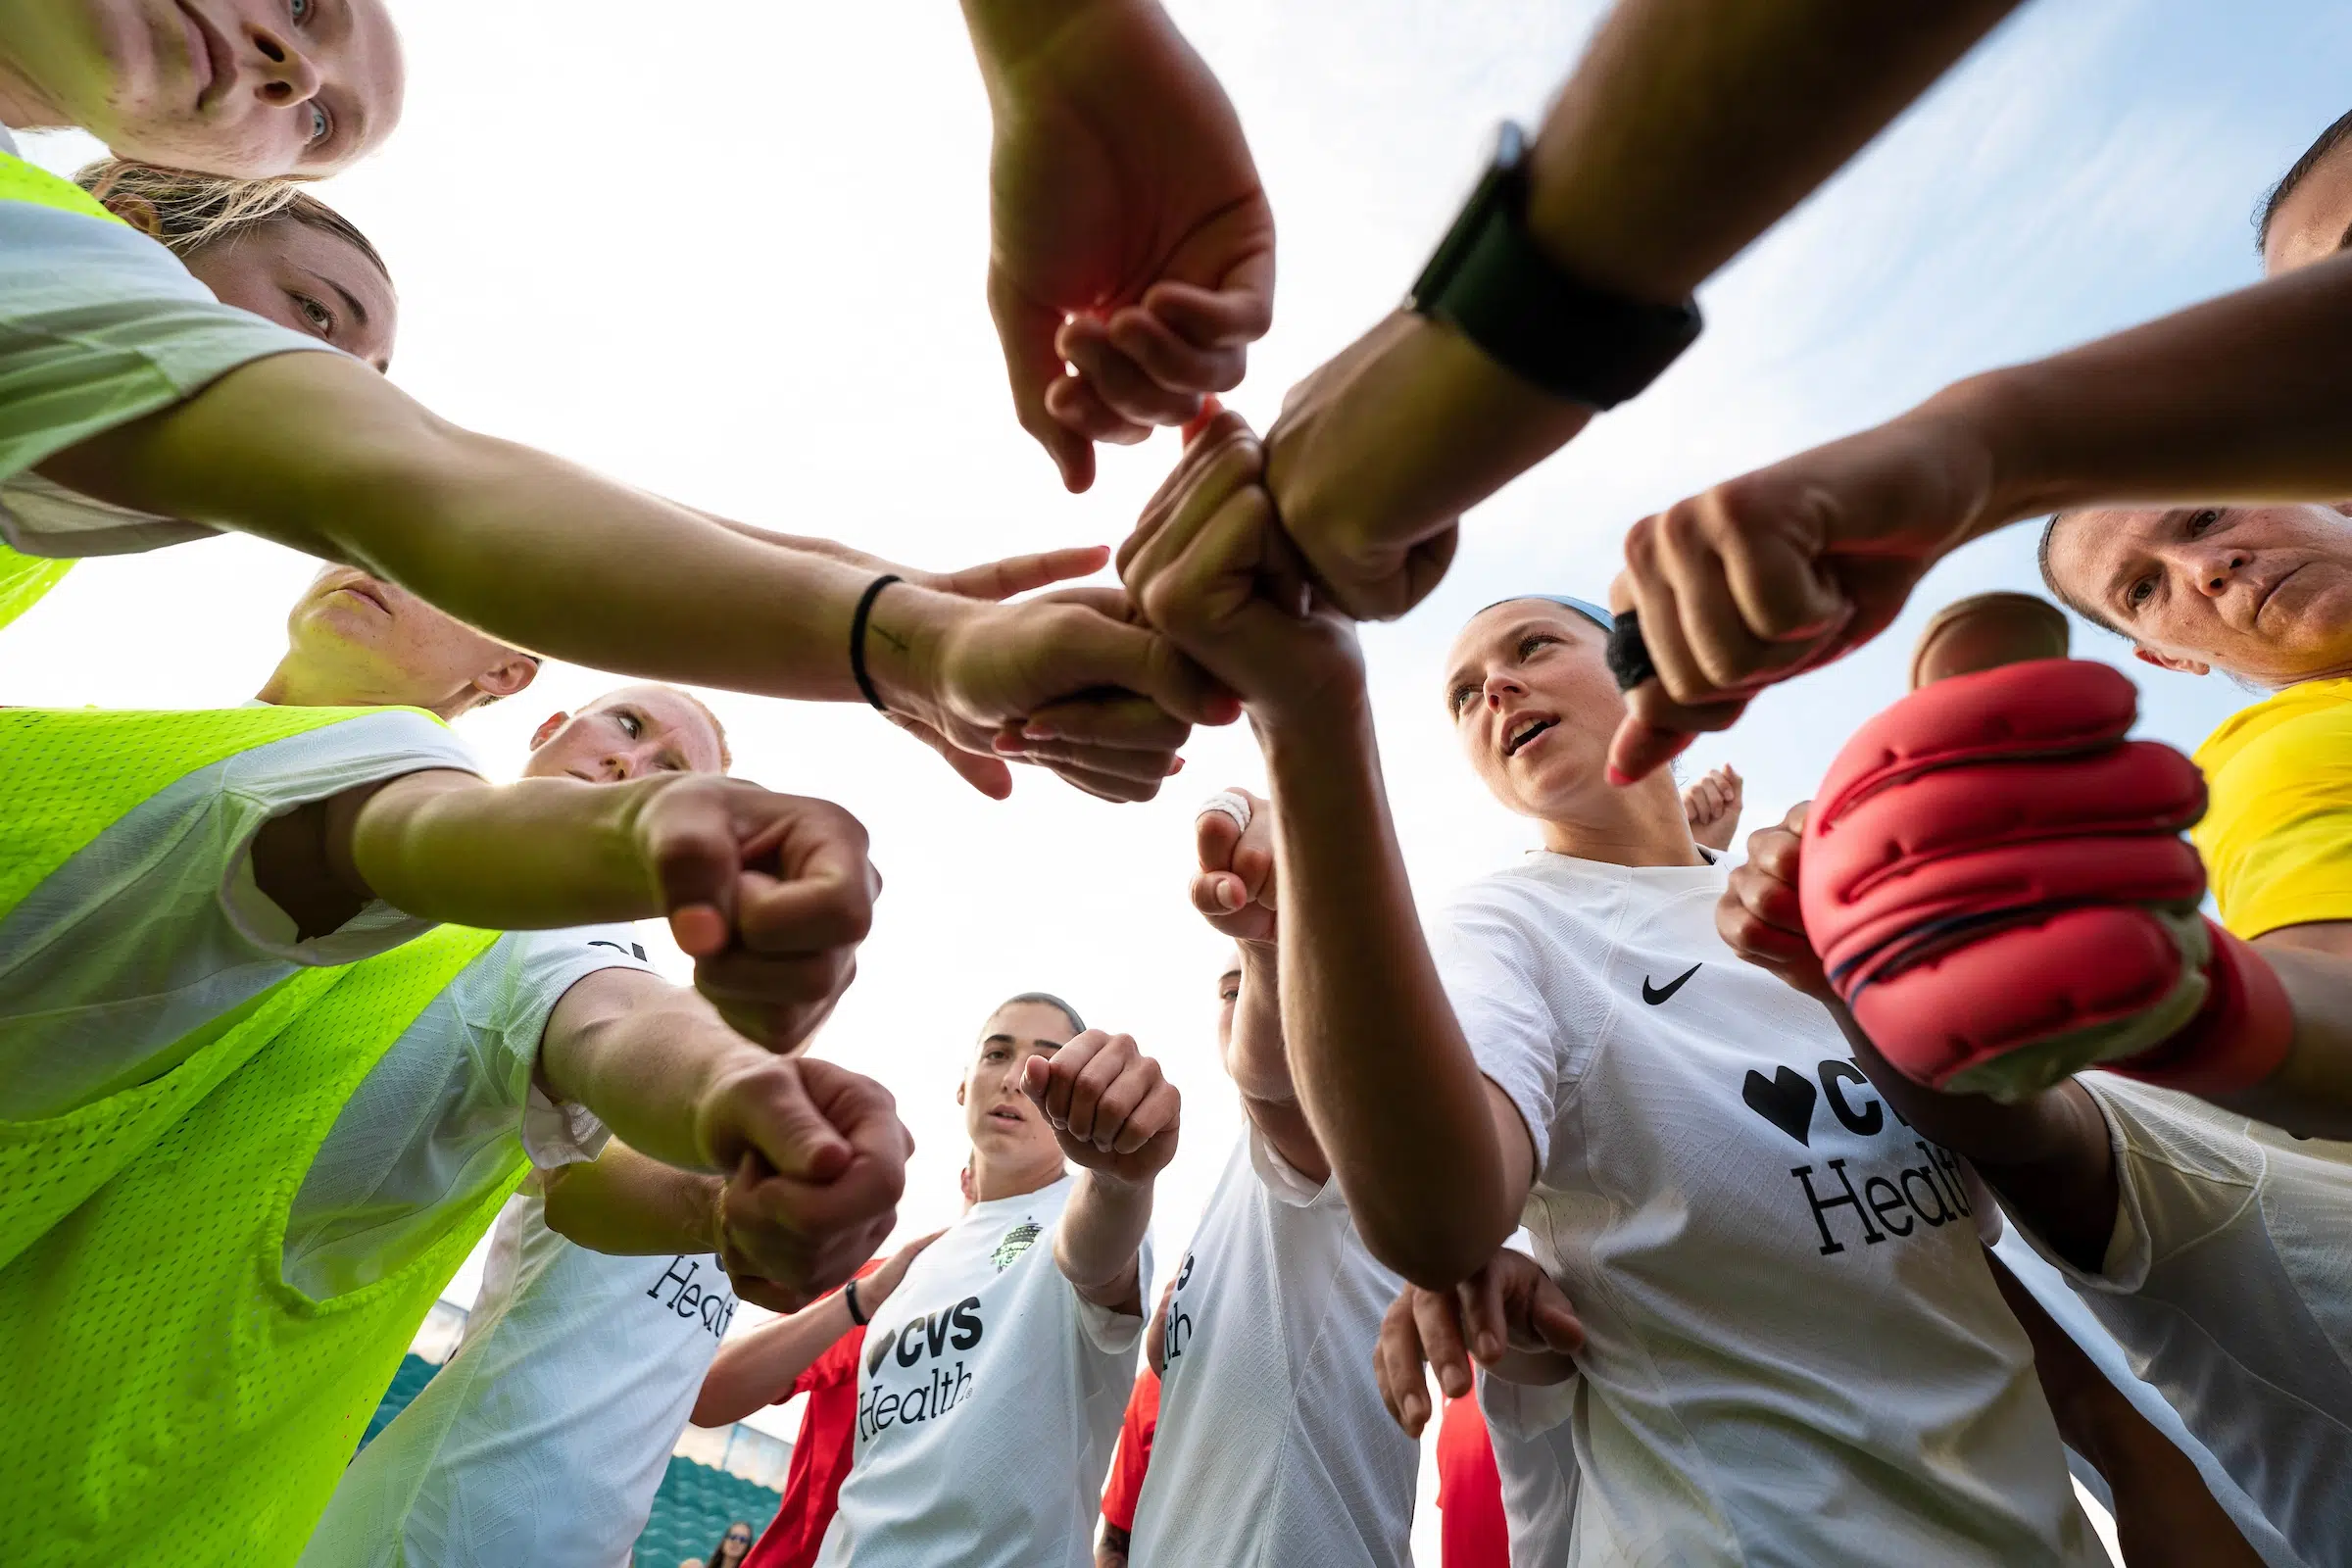 A group of soccer players in white uniforms huddle up and put their fists in the middle to cheer.